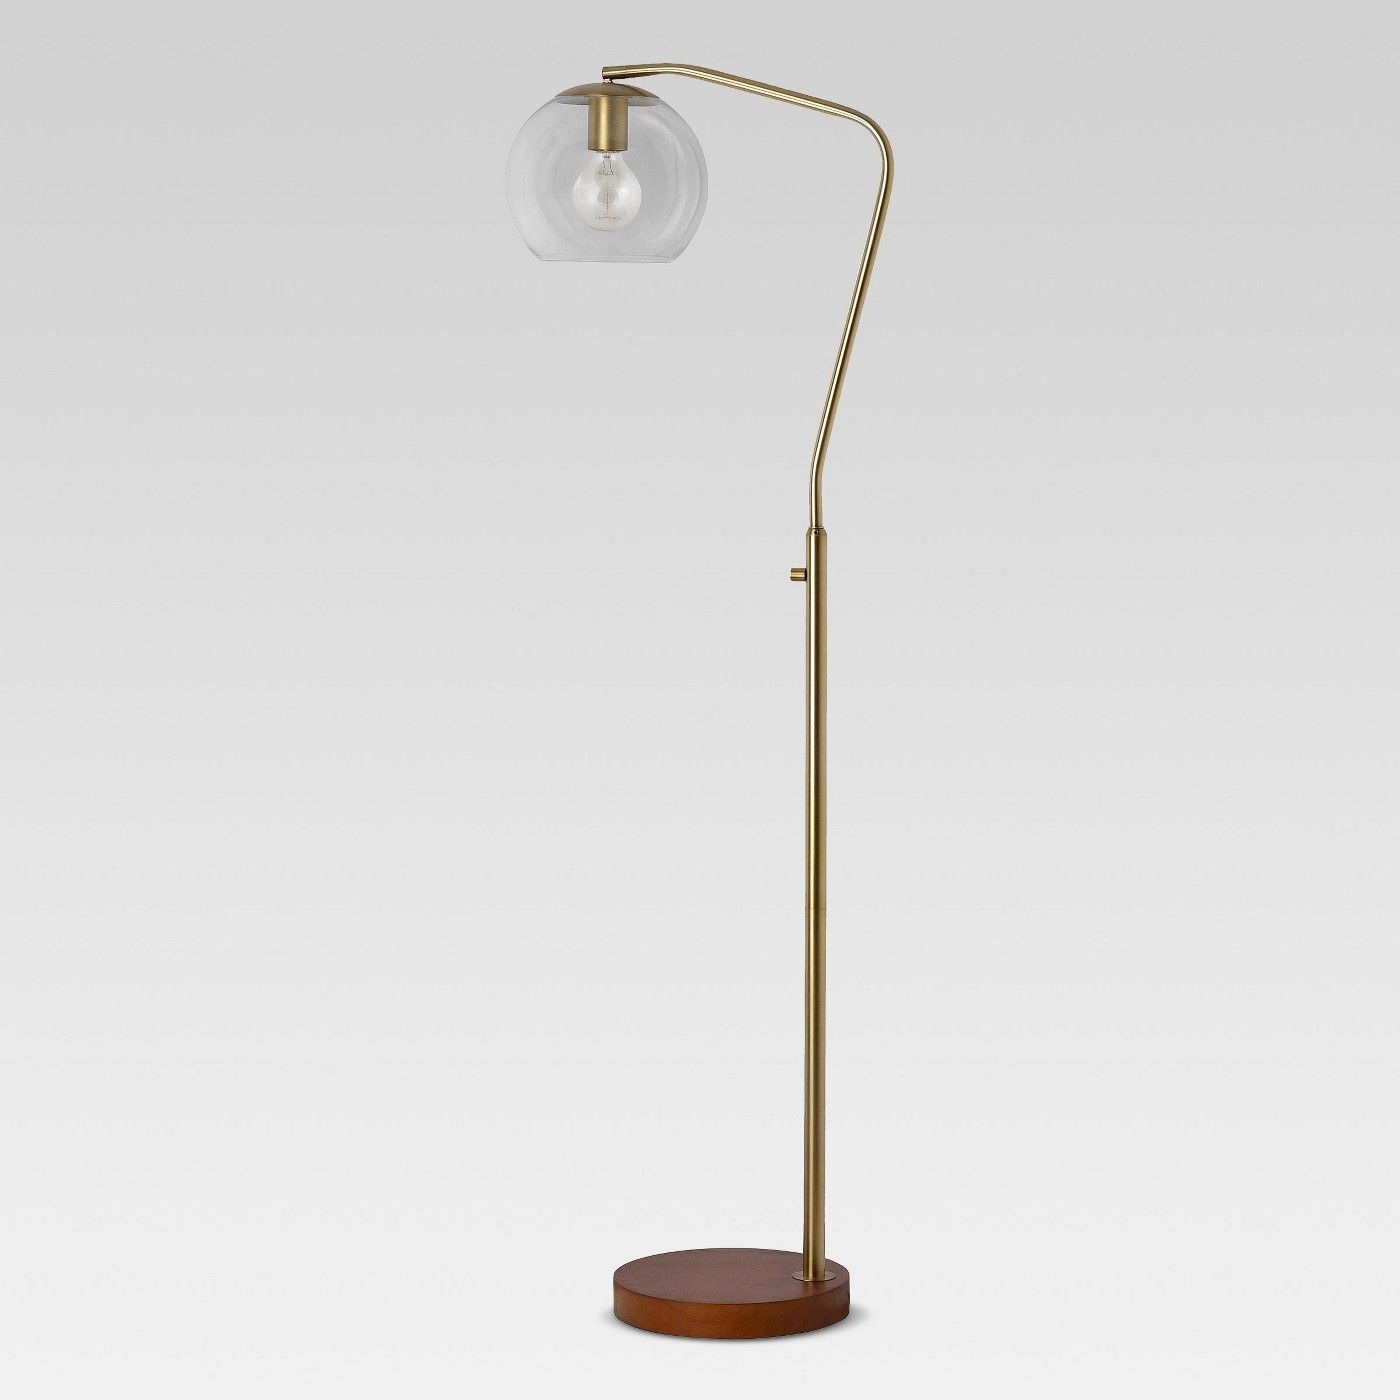 Menlo Glass Globe Floor Lamp Project 62 Image 1 Of 4 in sizing 1400 X 1400